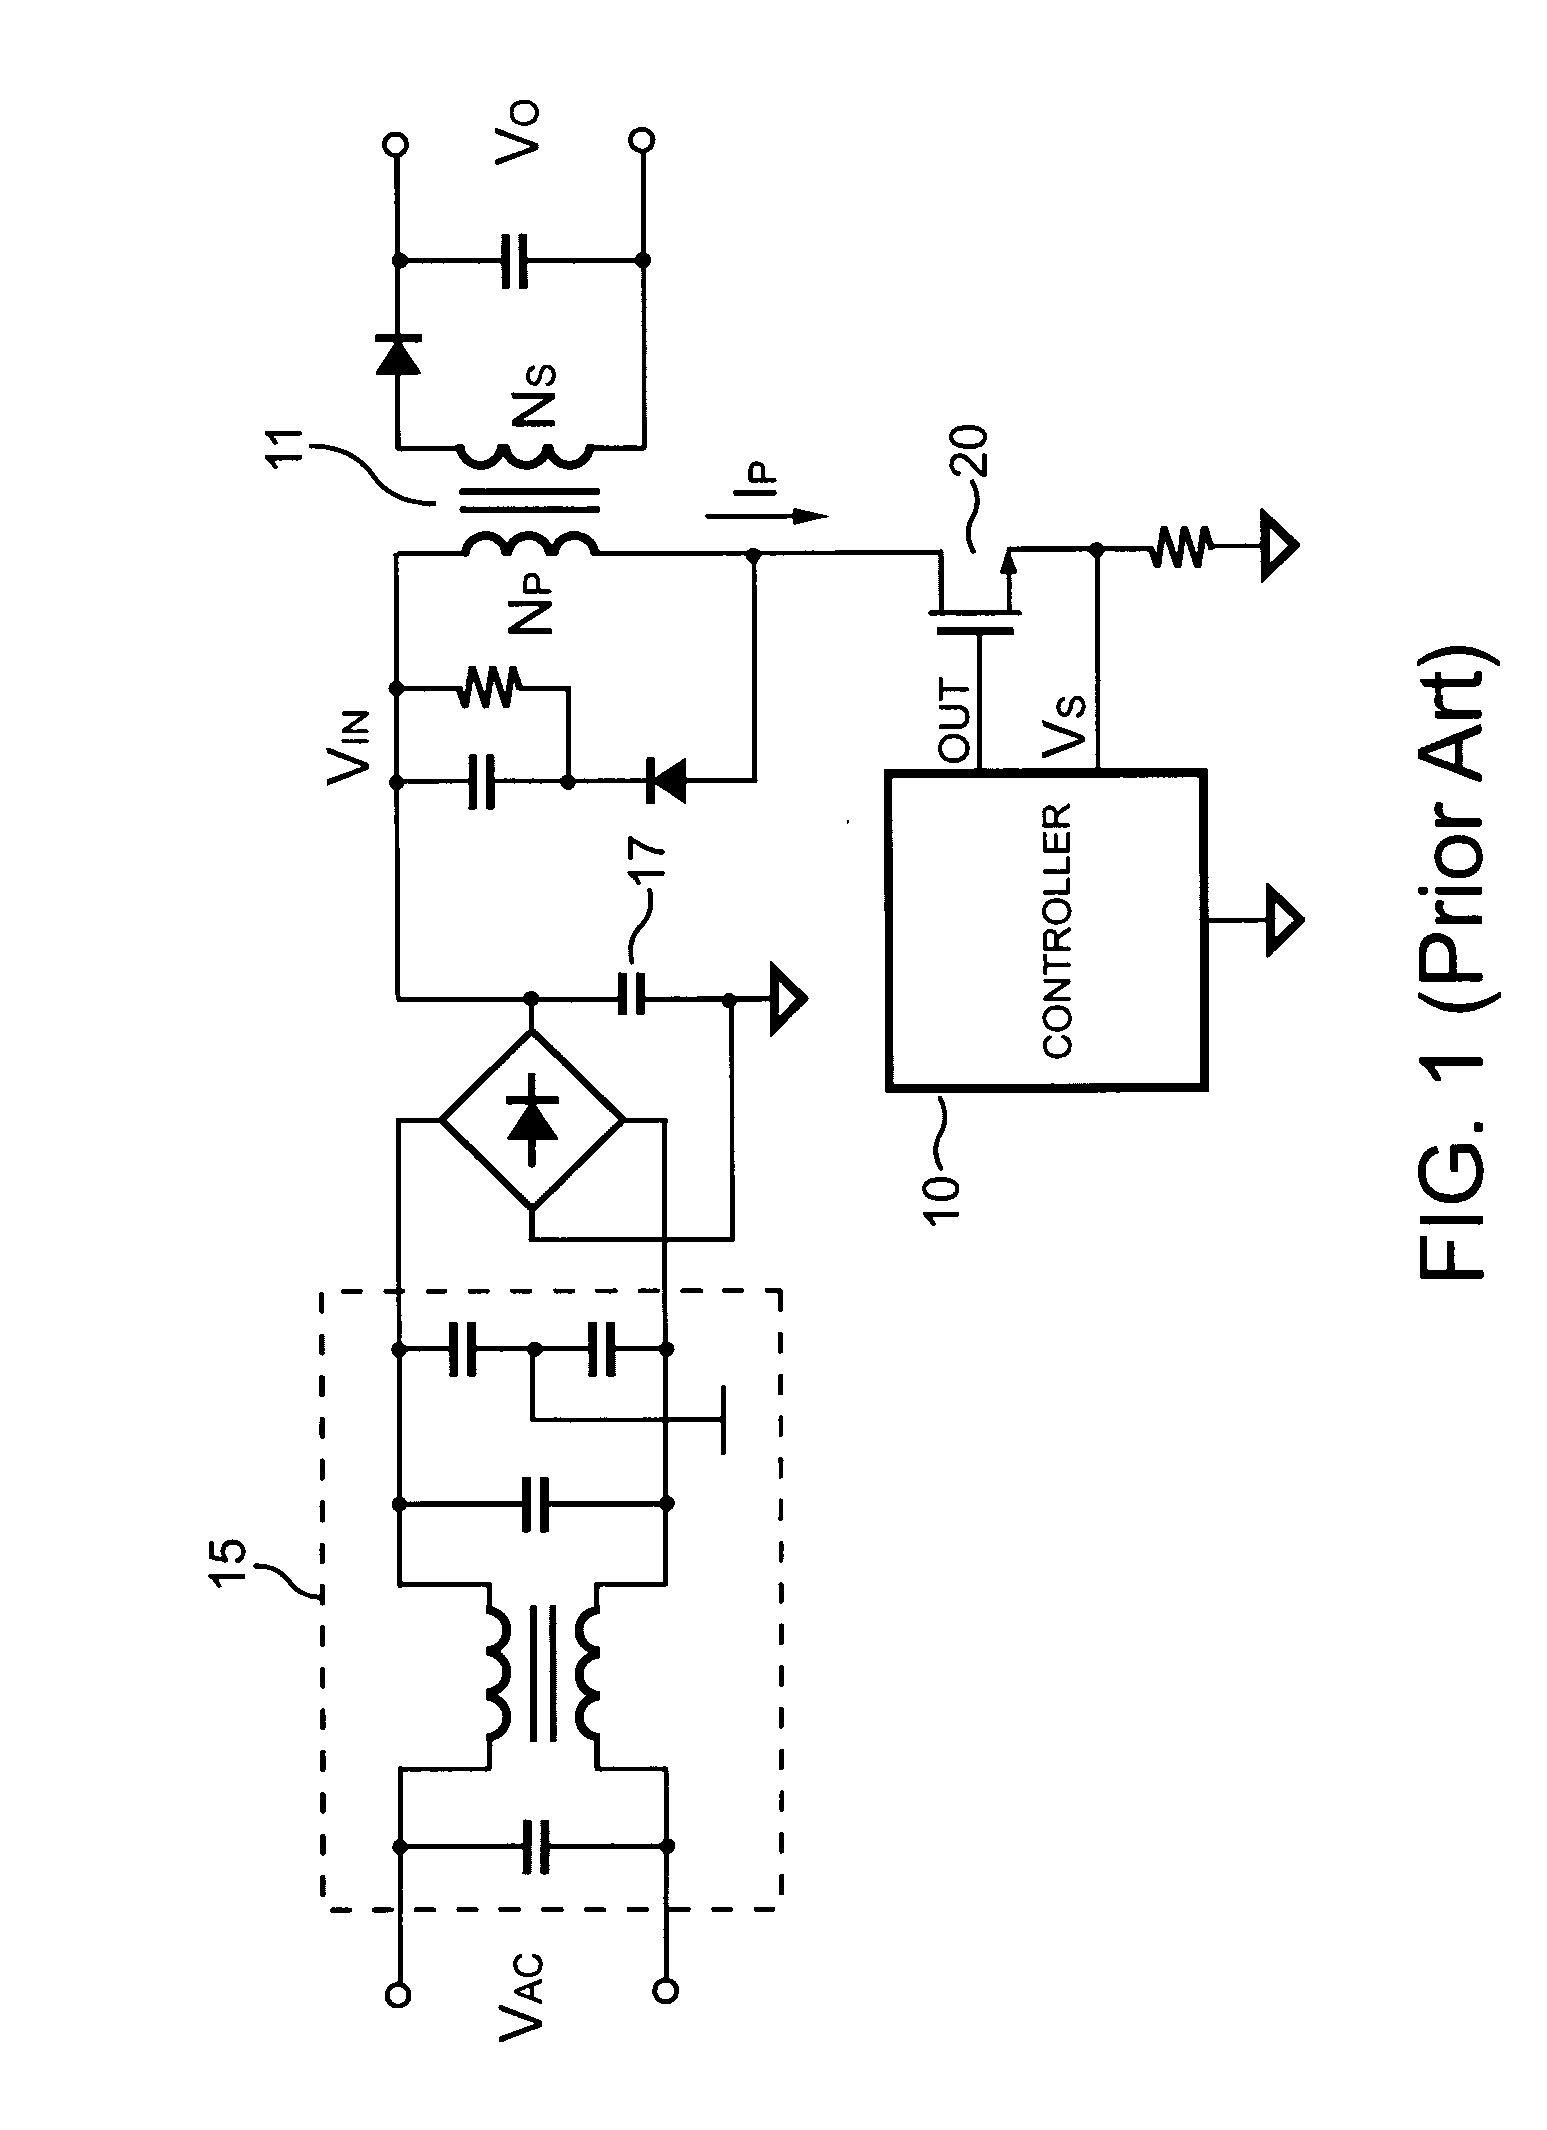 PWM controller having frequency jitter for power supplies